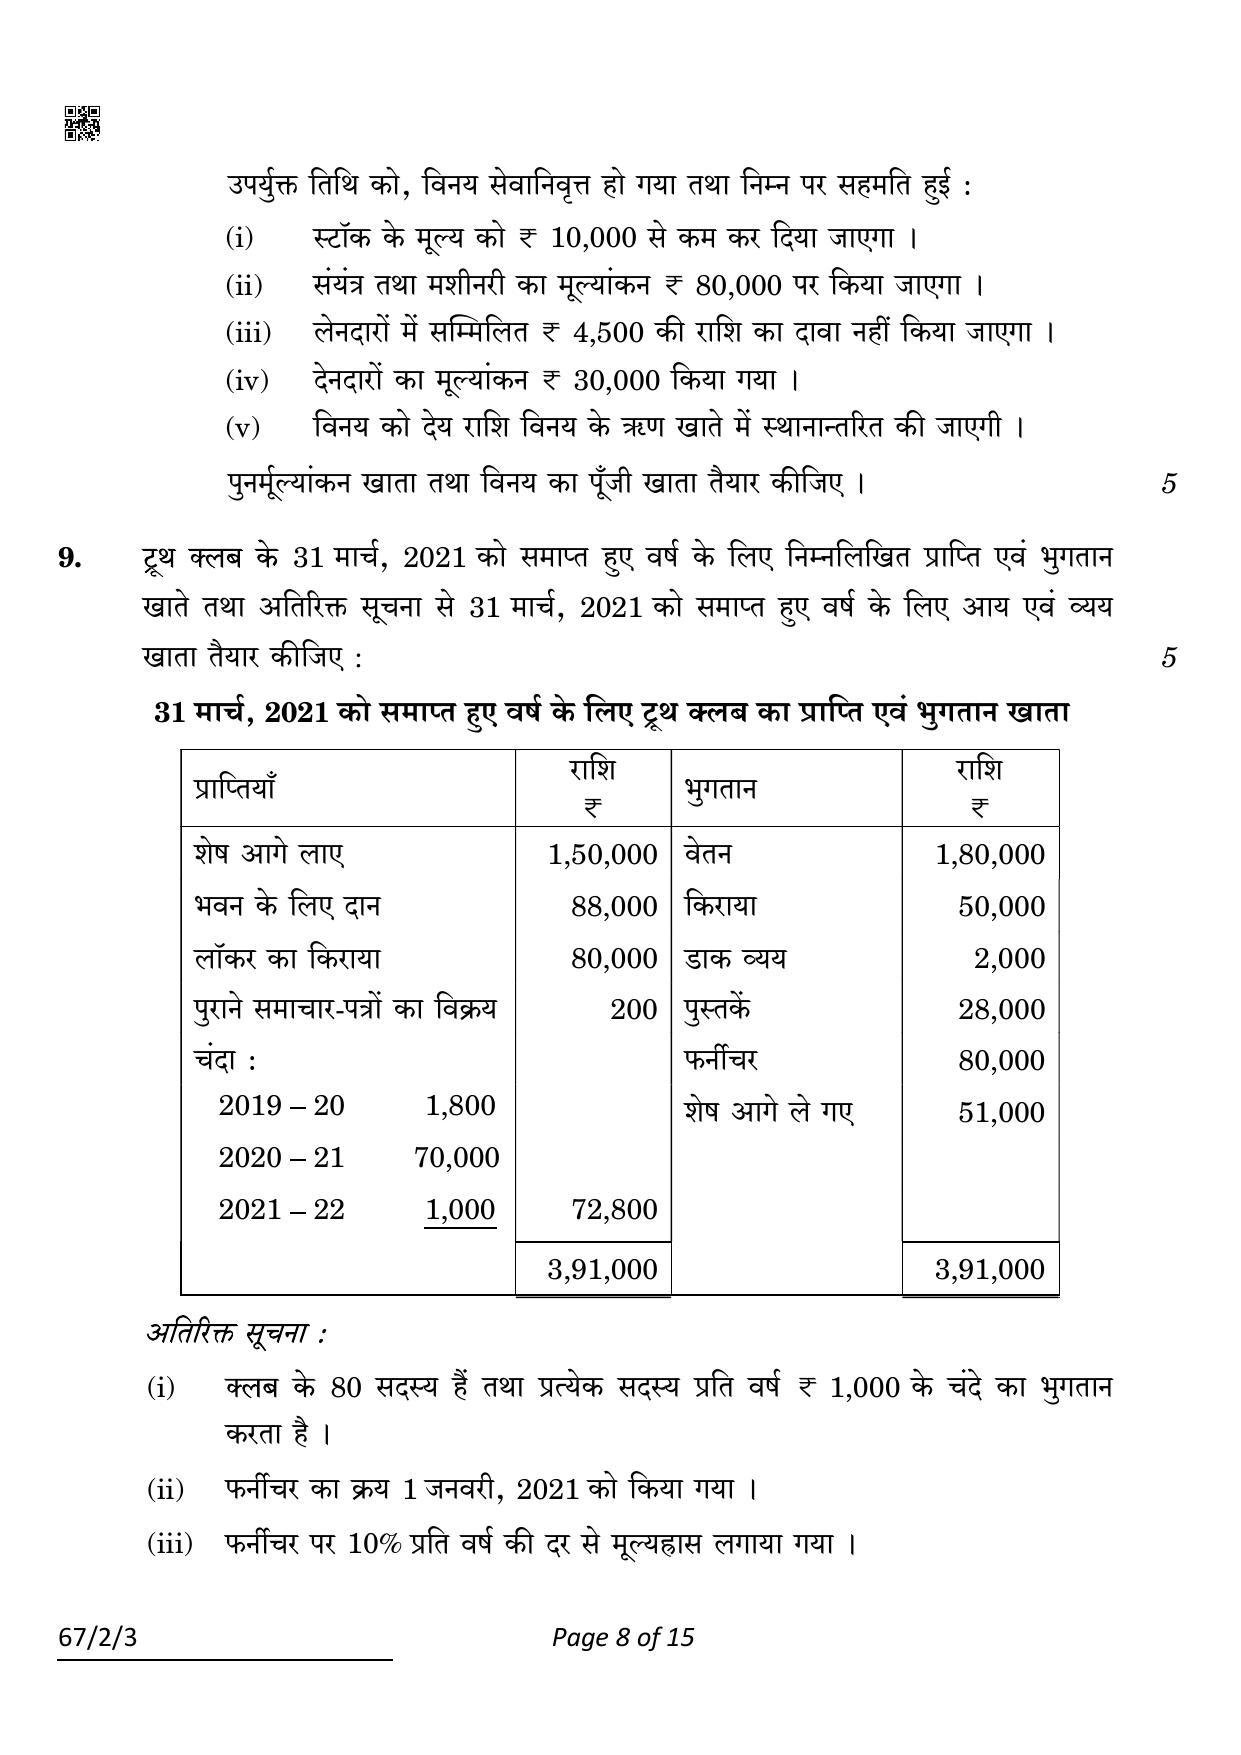 CBSE Class 12 67-2-3 Accountancy 2022 Question Paper - Page 8